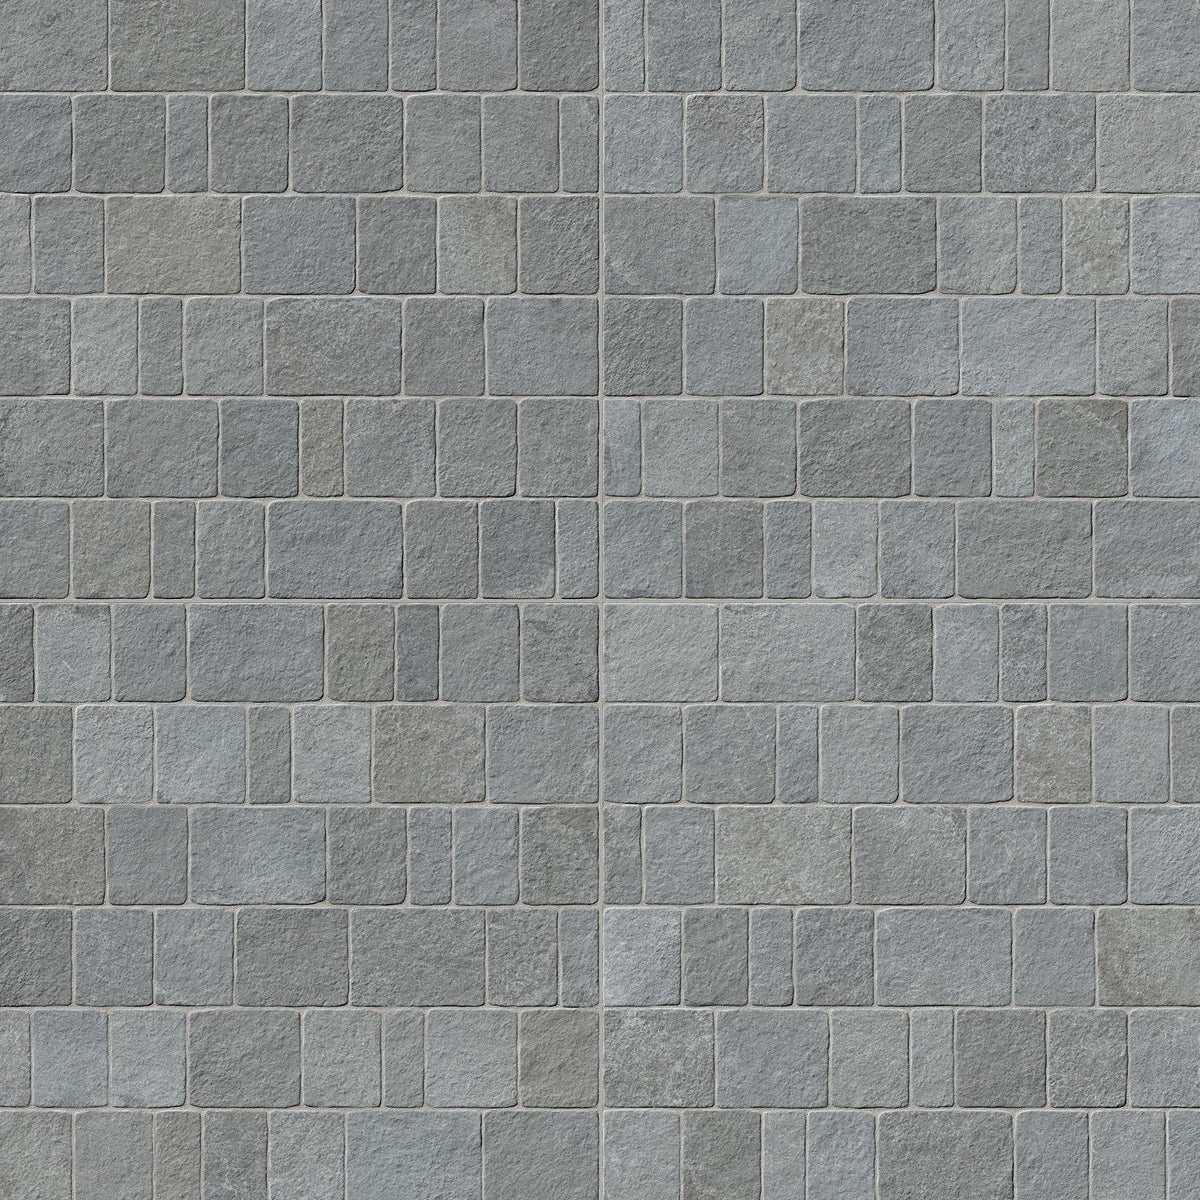 BUY ONLINE: Frontier 20 Stone absolute paving, 24x24x20-mm, Matte